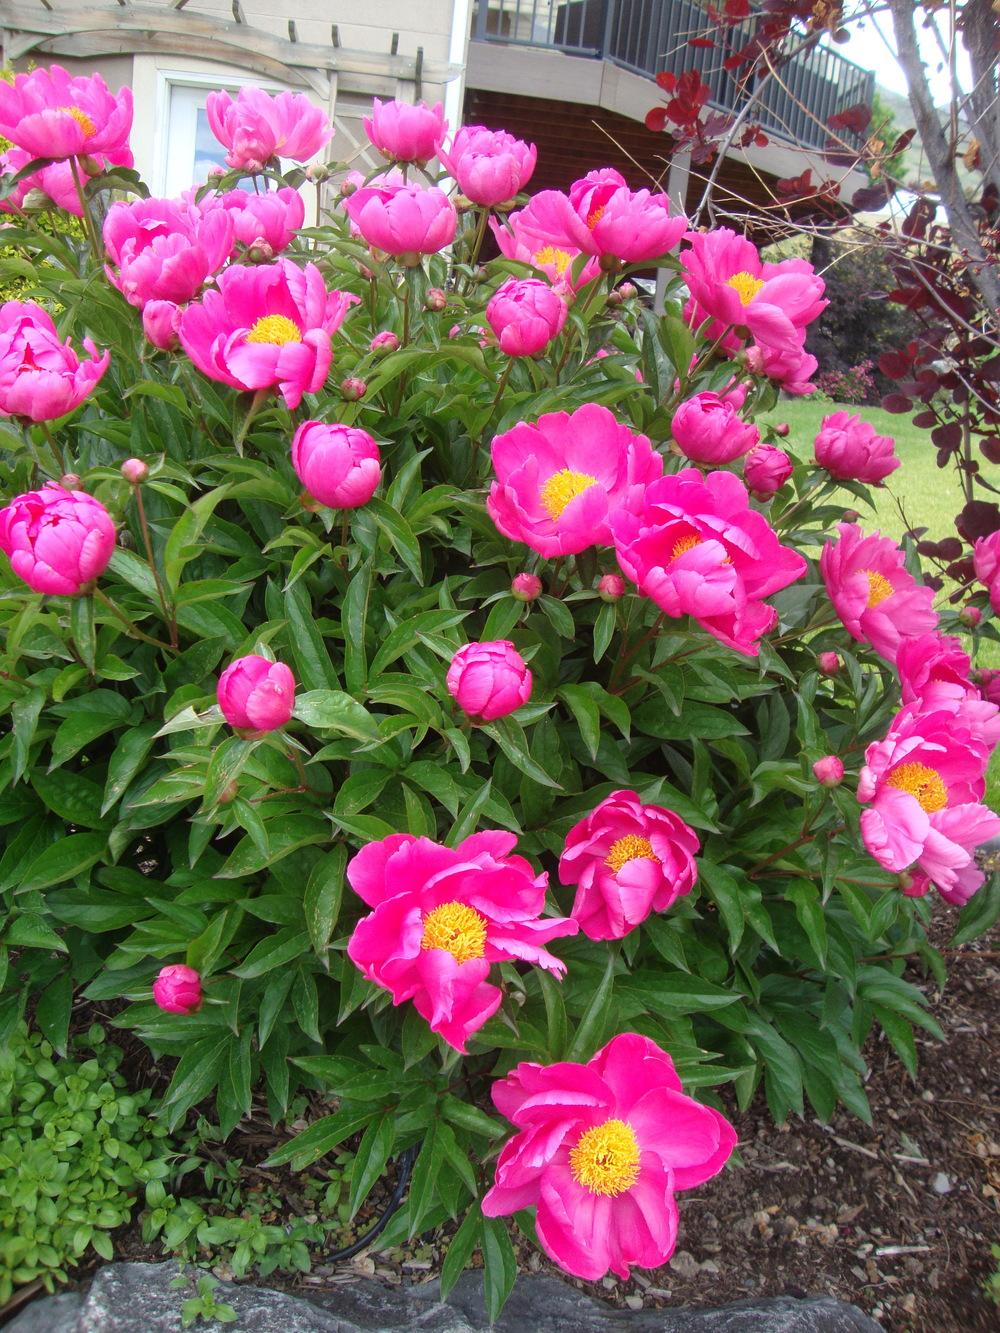 Photo of Peonies (Paeonia) uploaded by Paul2032